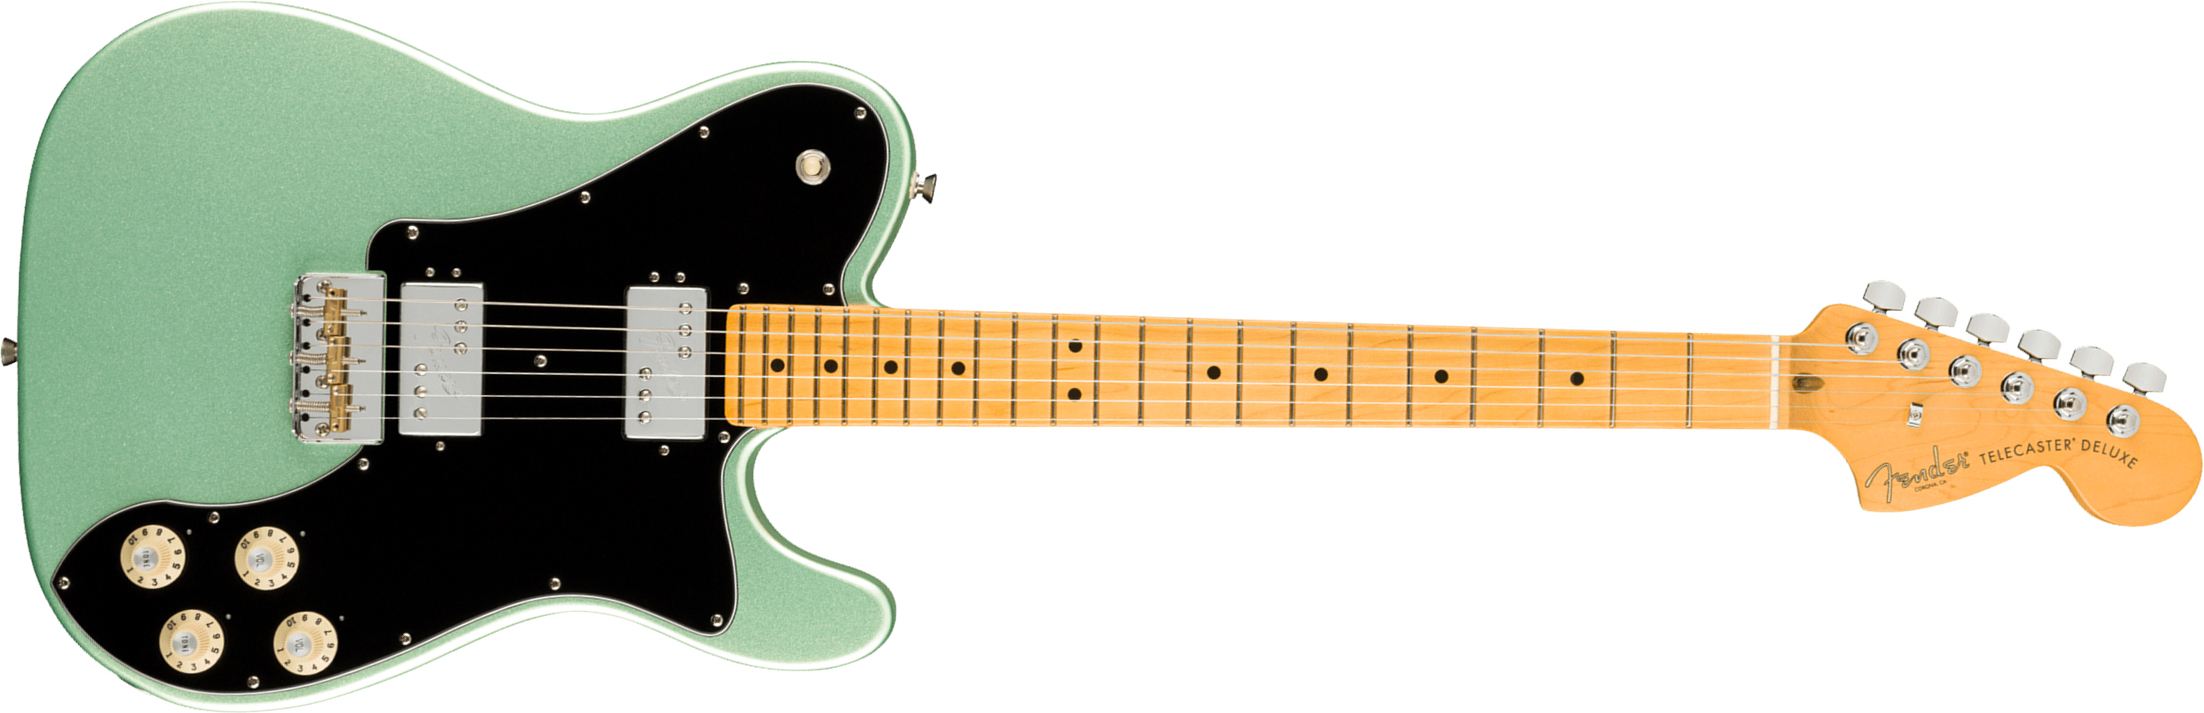 Fender Tele Deluxe American Professional Ii Usa Mn - Mystic Surf Green - Tel shape electric guitar - Main picture